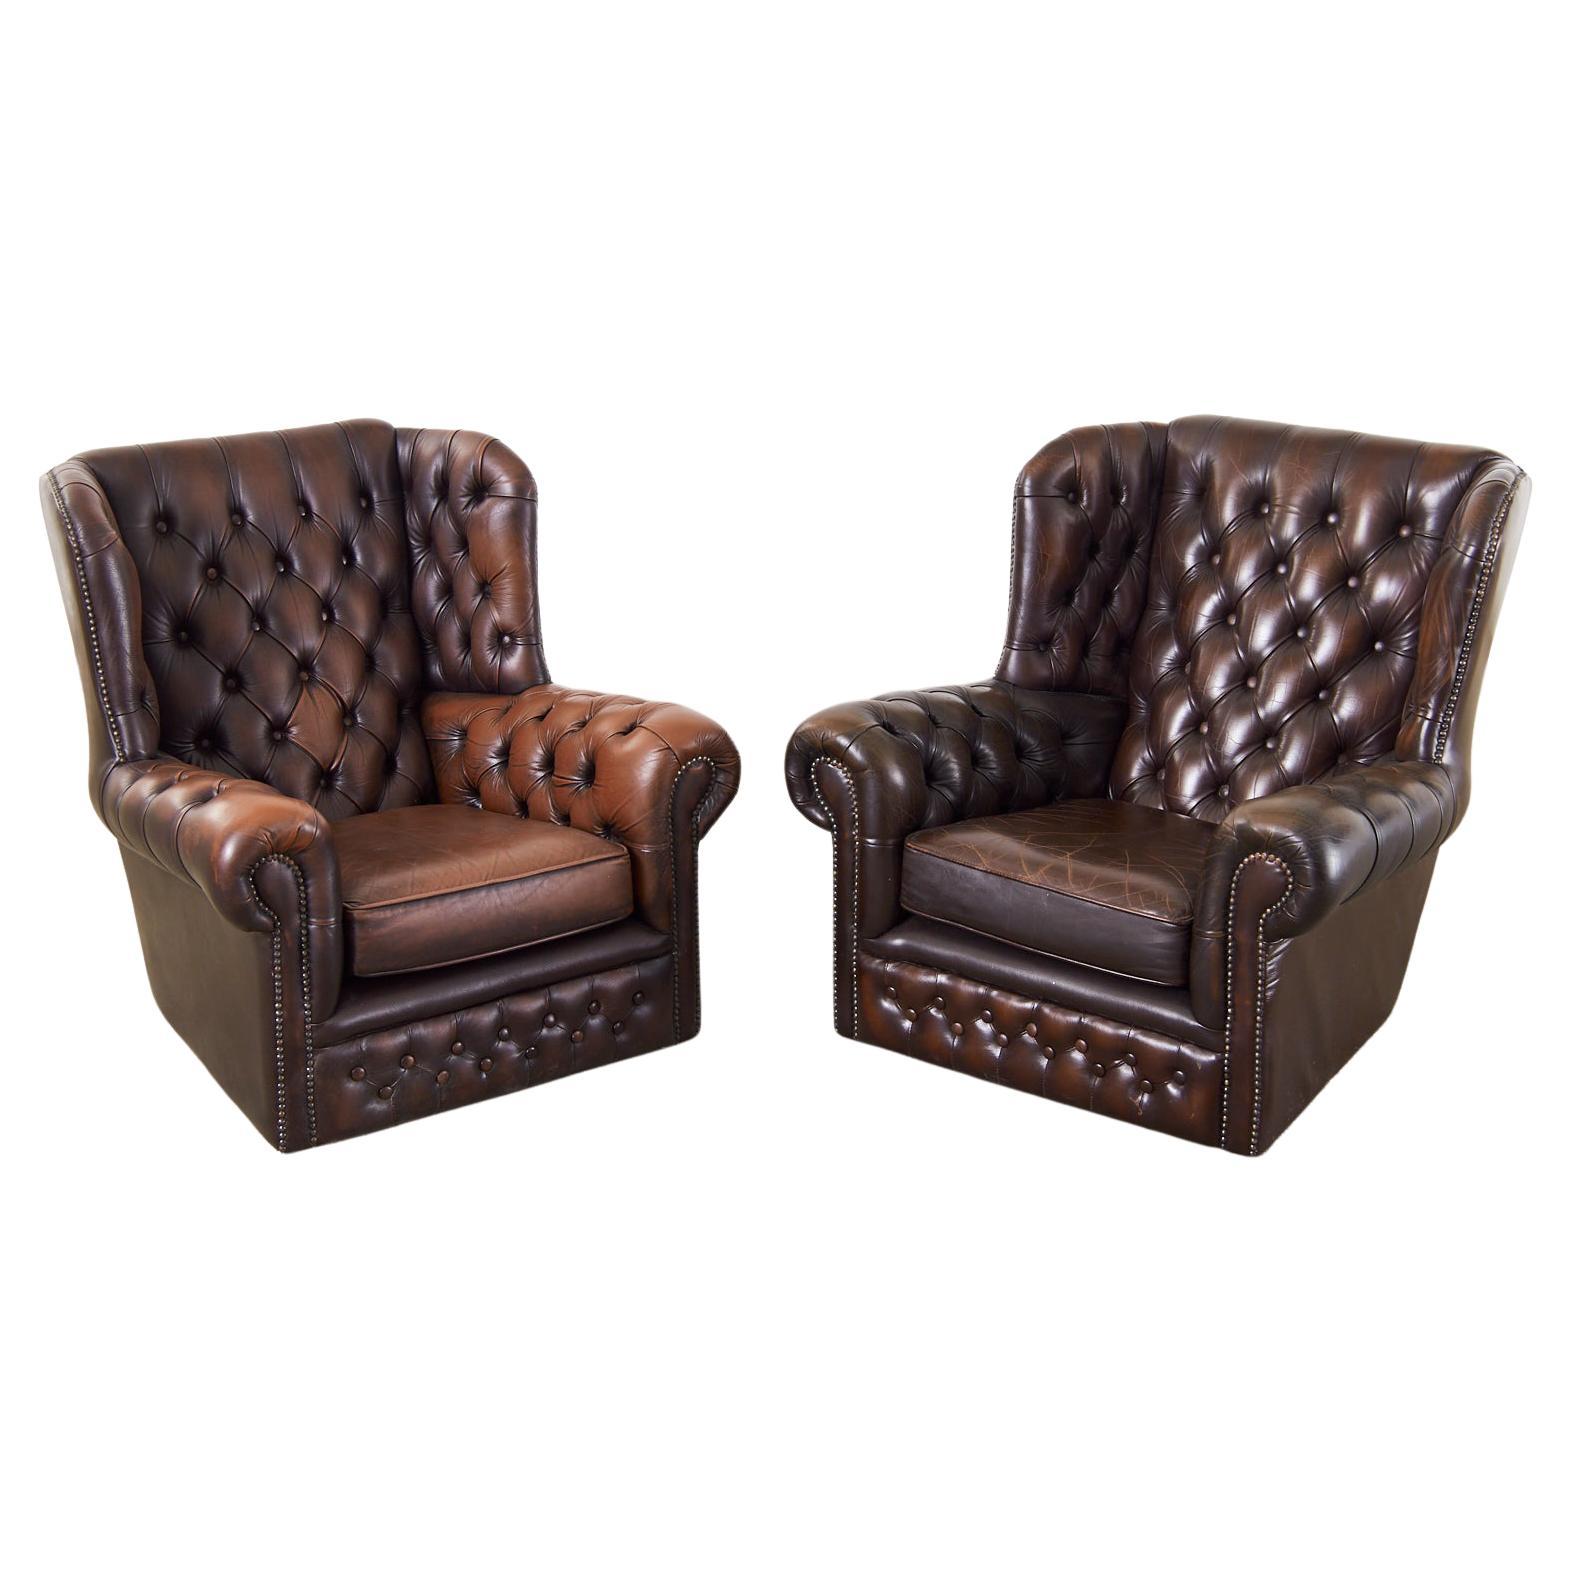 Pair of English Thomas Lloyd Cigar Leather Chesterfield Wingback Chairs